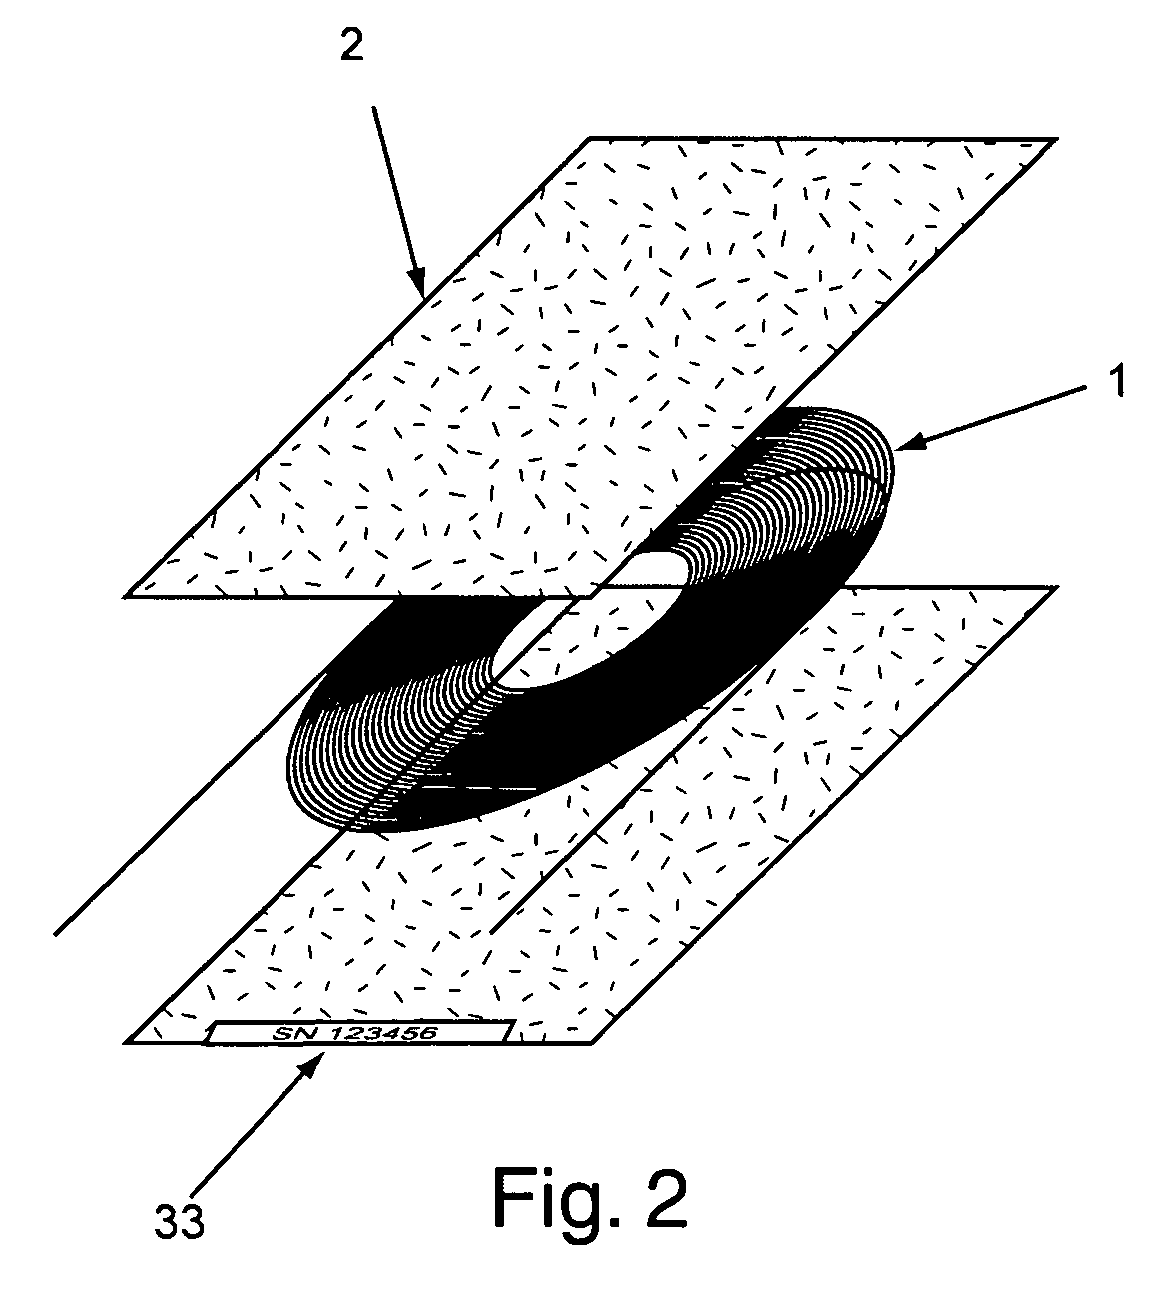 Flat spiral capillary column assembly with thermal modulator